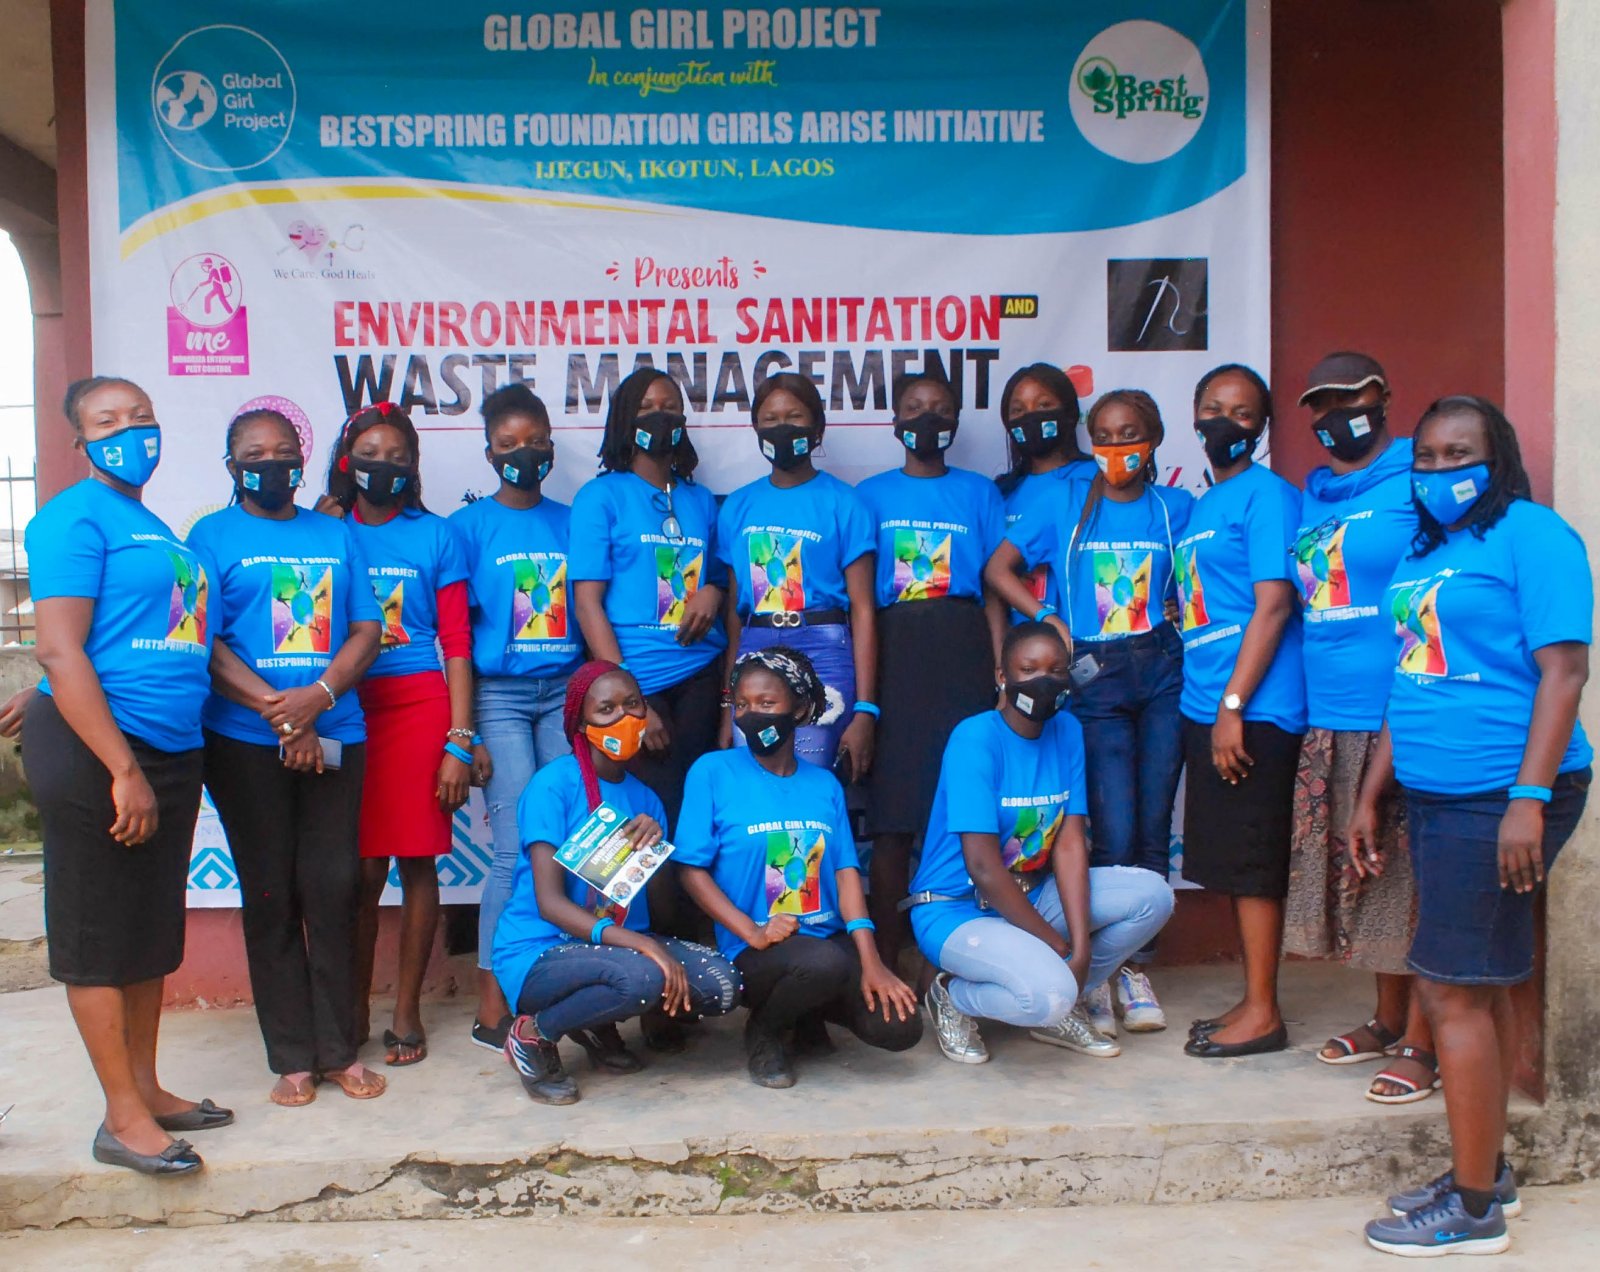 Their theme was Environmental Sanitation and waste management